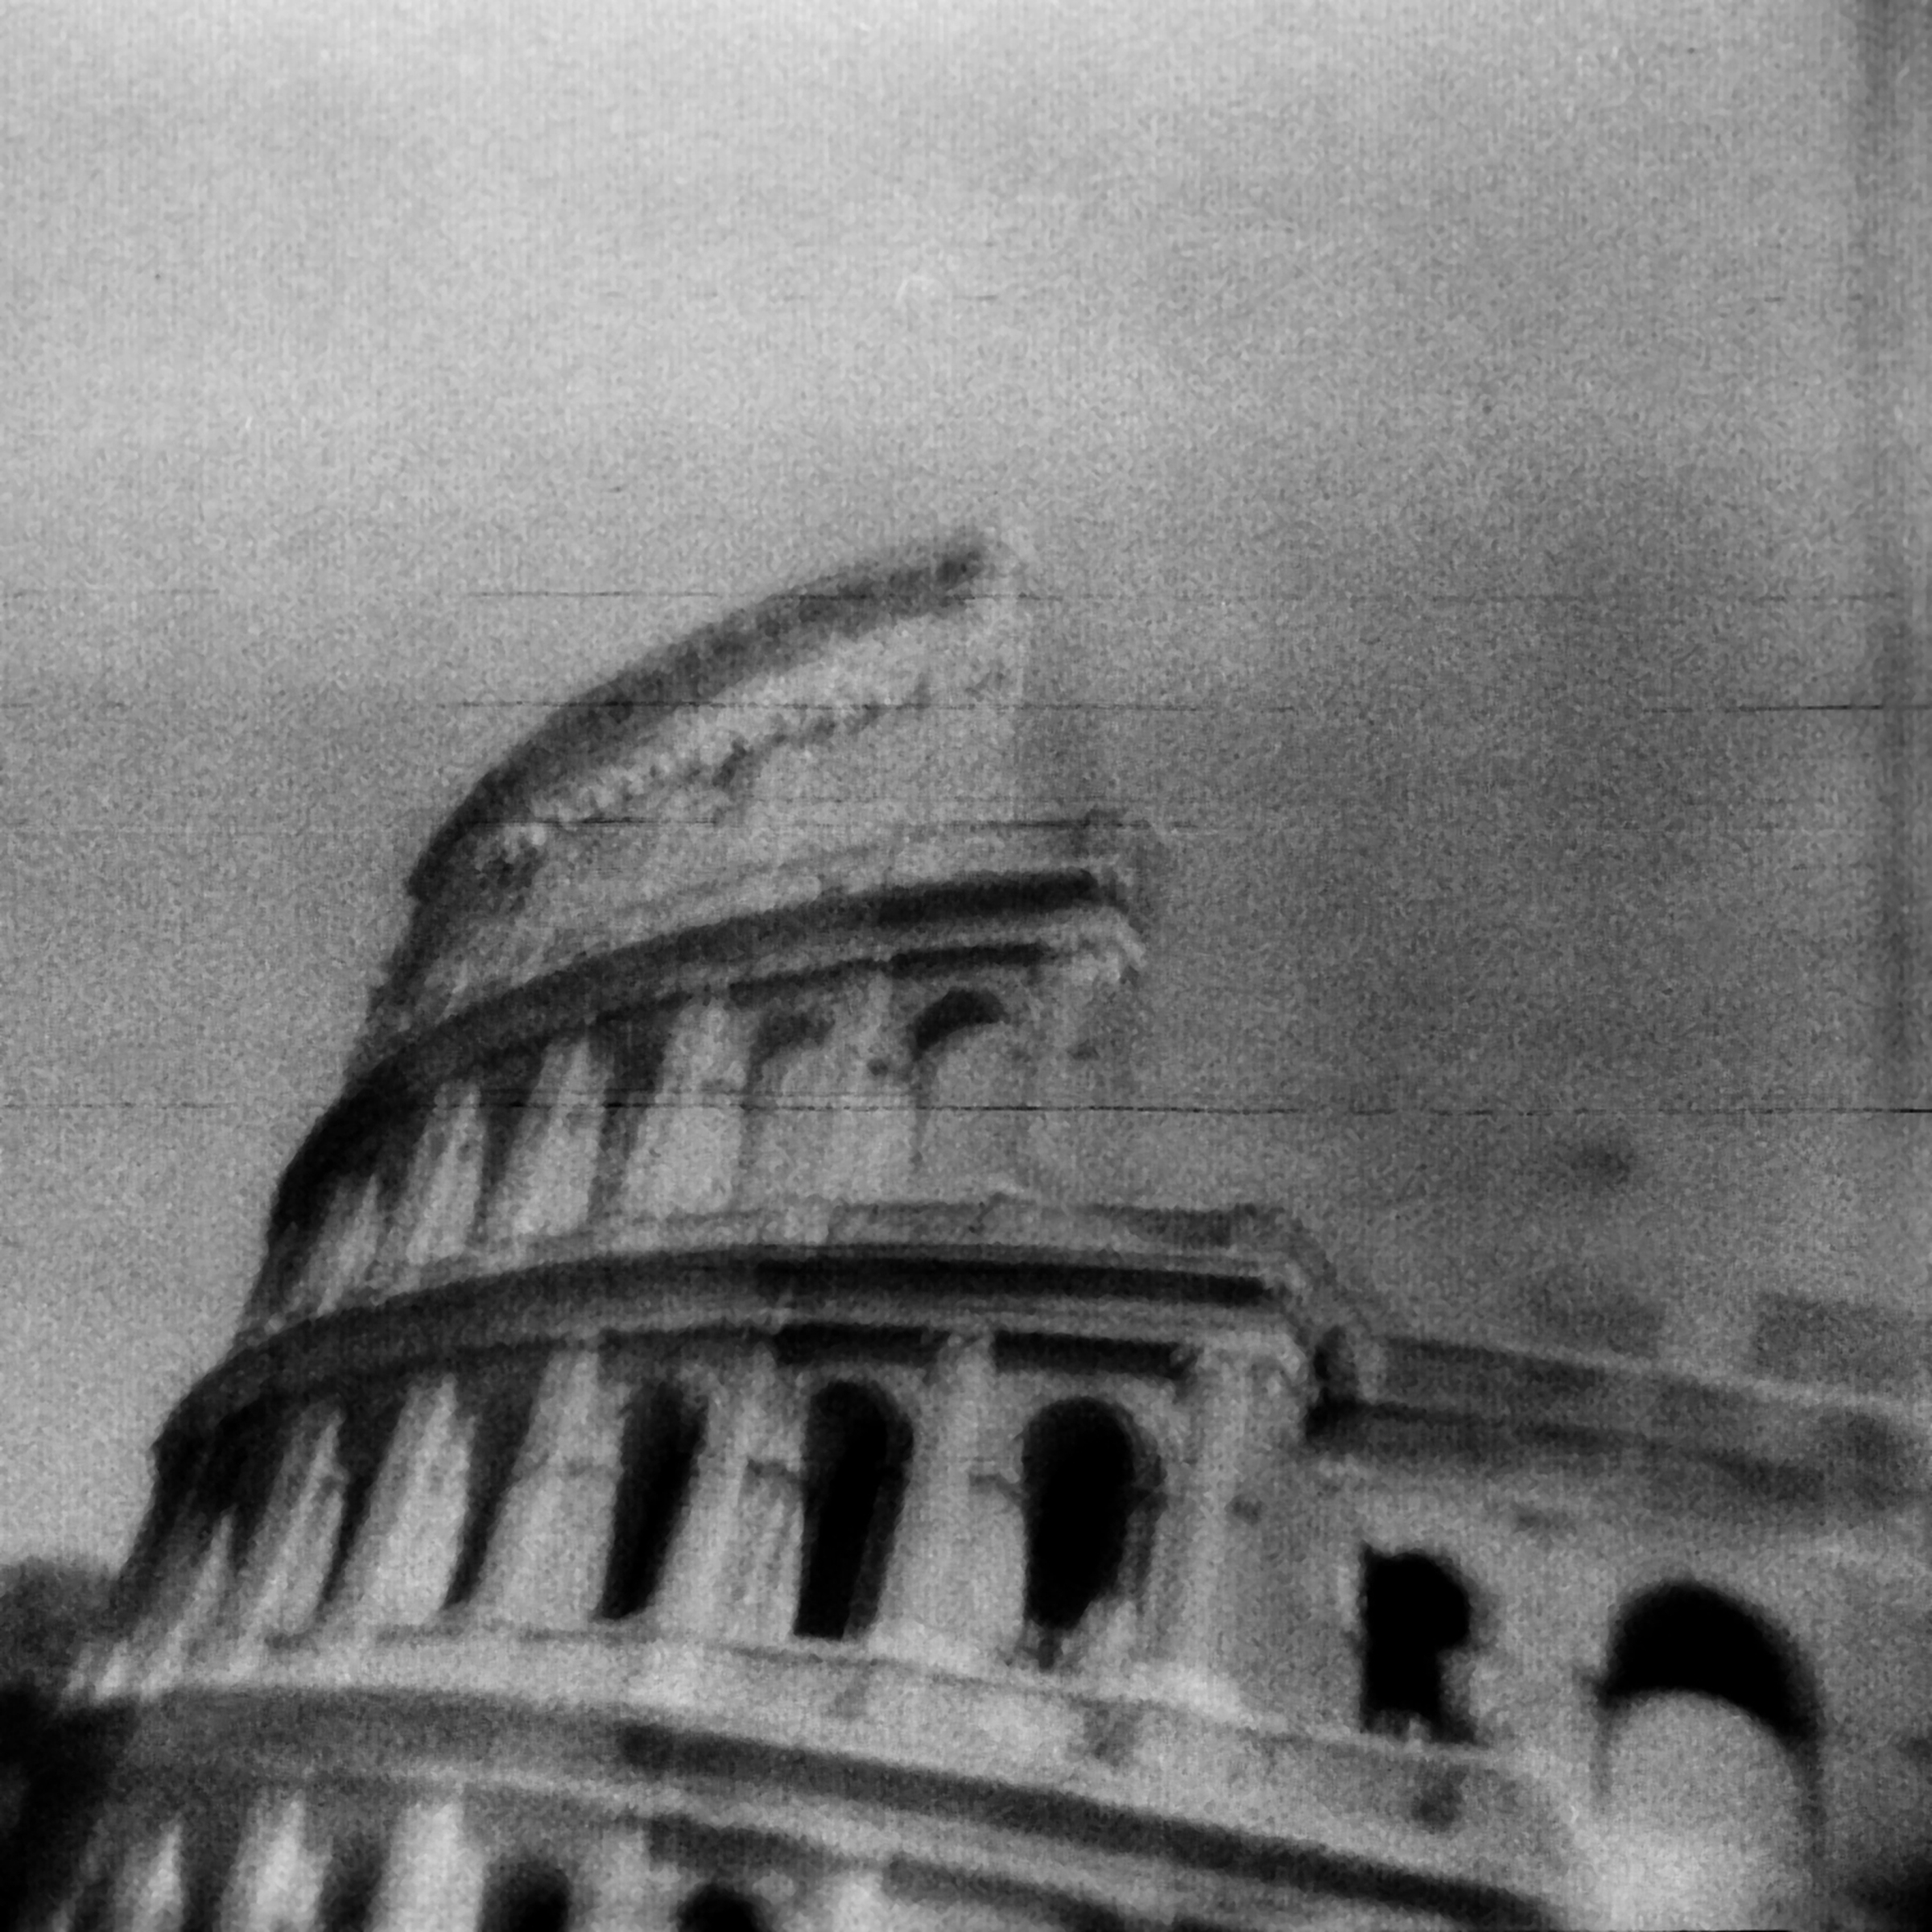     Anthea Baxter-Page, Colosseum, Rome, from the Ghost Towns series, 2006

